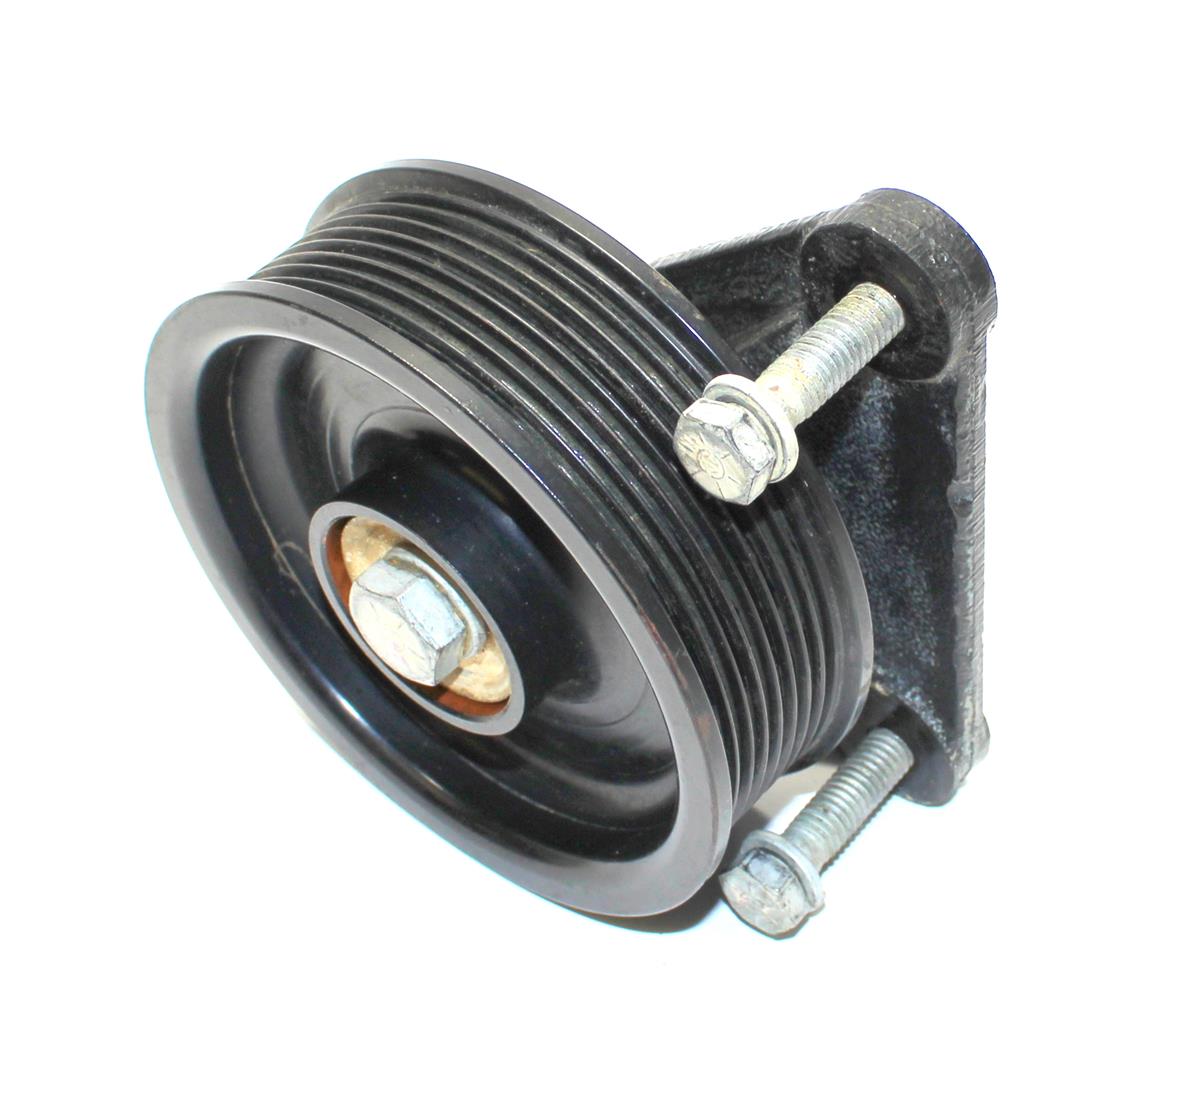 HM-3684 | HM-3684 8 Grooved Pulley with Mounting Bracket Fan Assembly HMMWV (11).JPG